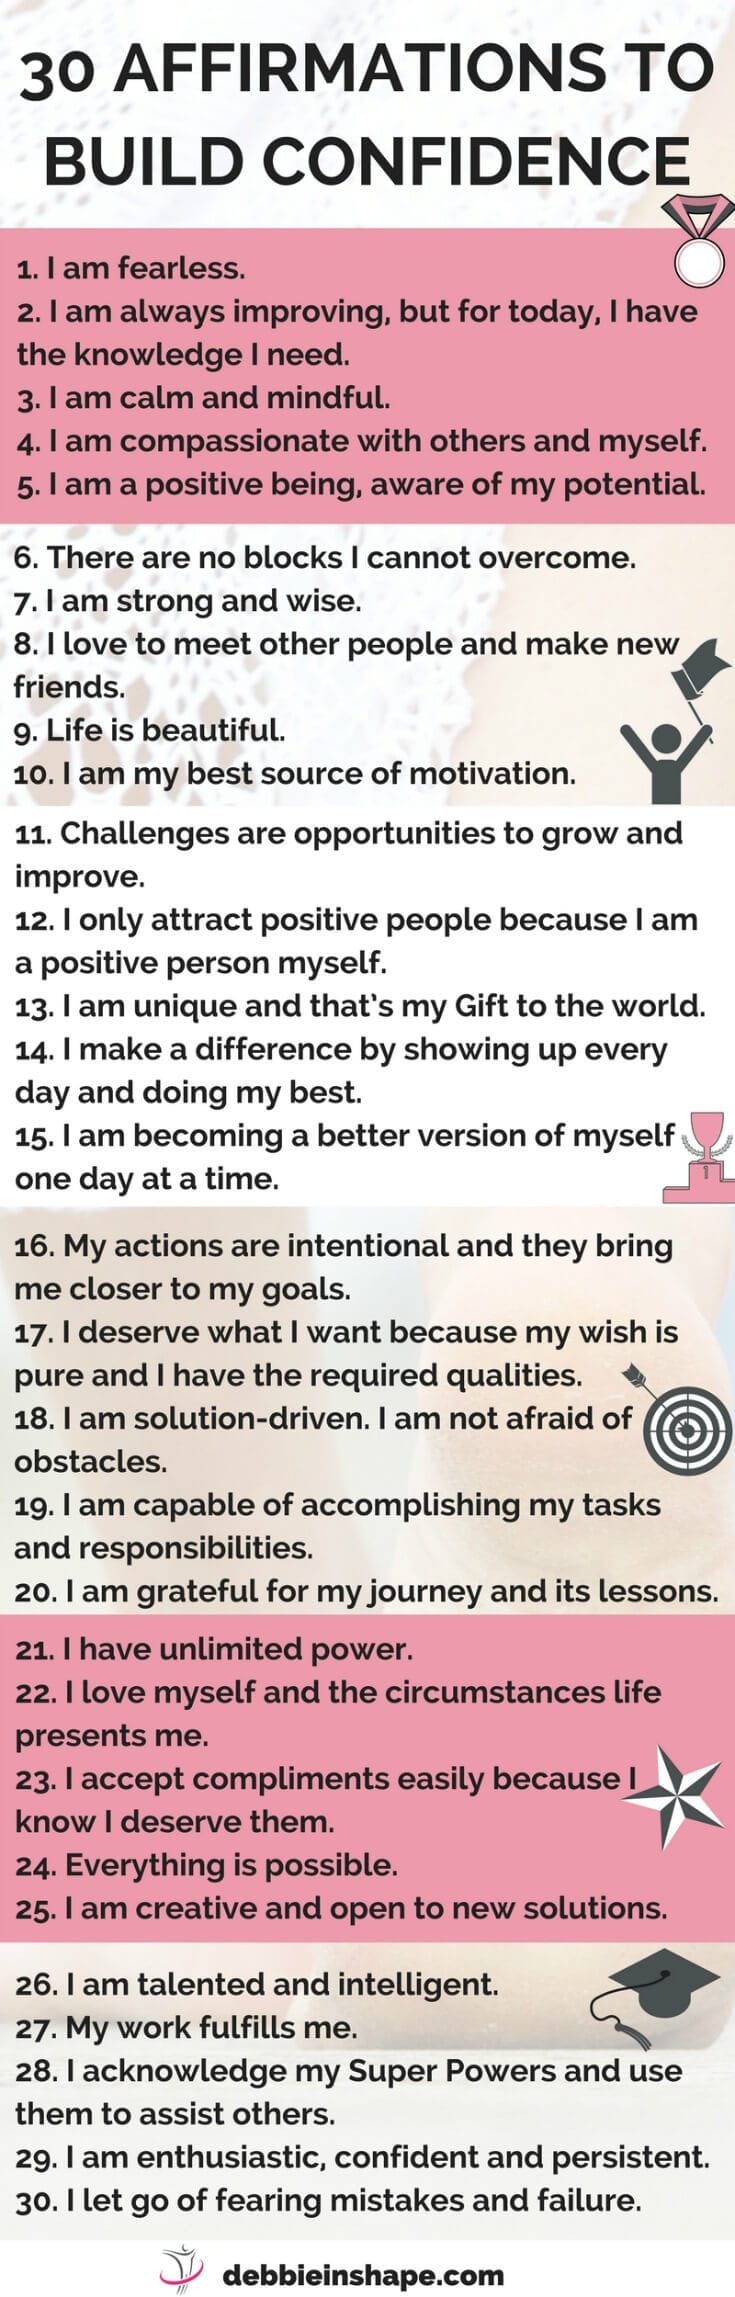 Check out these positive affirmations for women. #affirmation #happiness #women #selflove #selfconfidence #career #inspirational #success #motivation